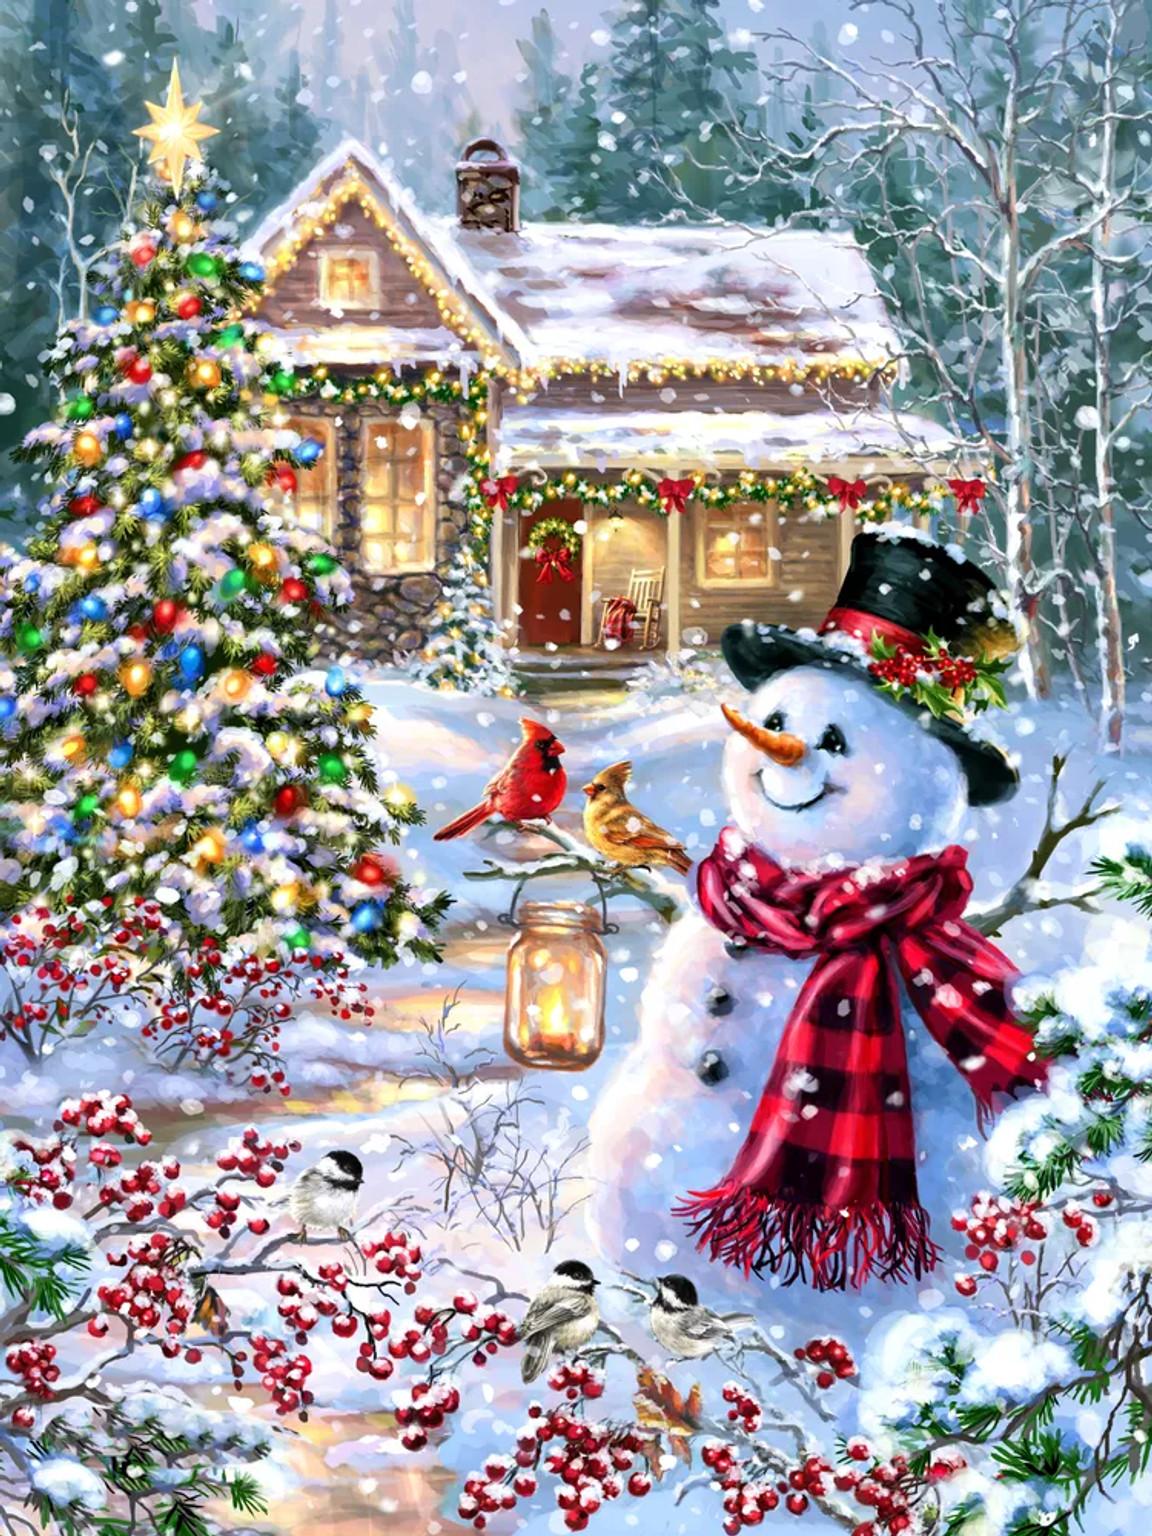 Cottage in the Snow Christmas Jigsaw Puzzle